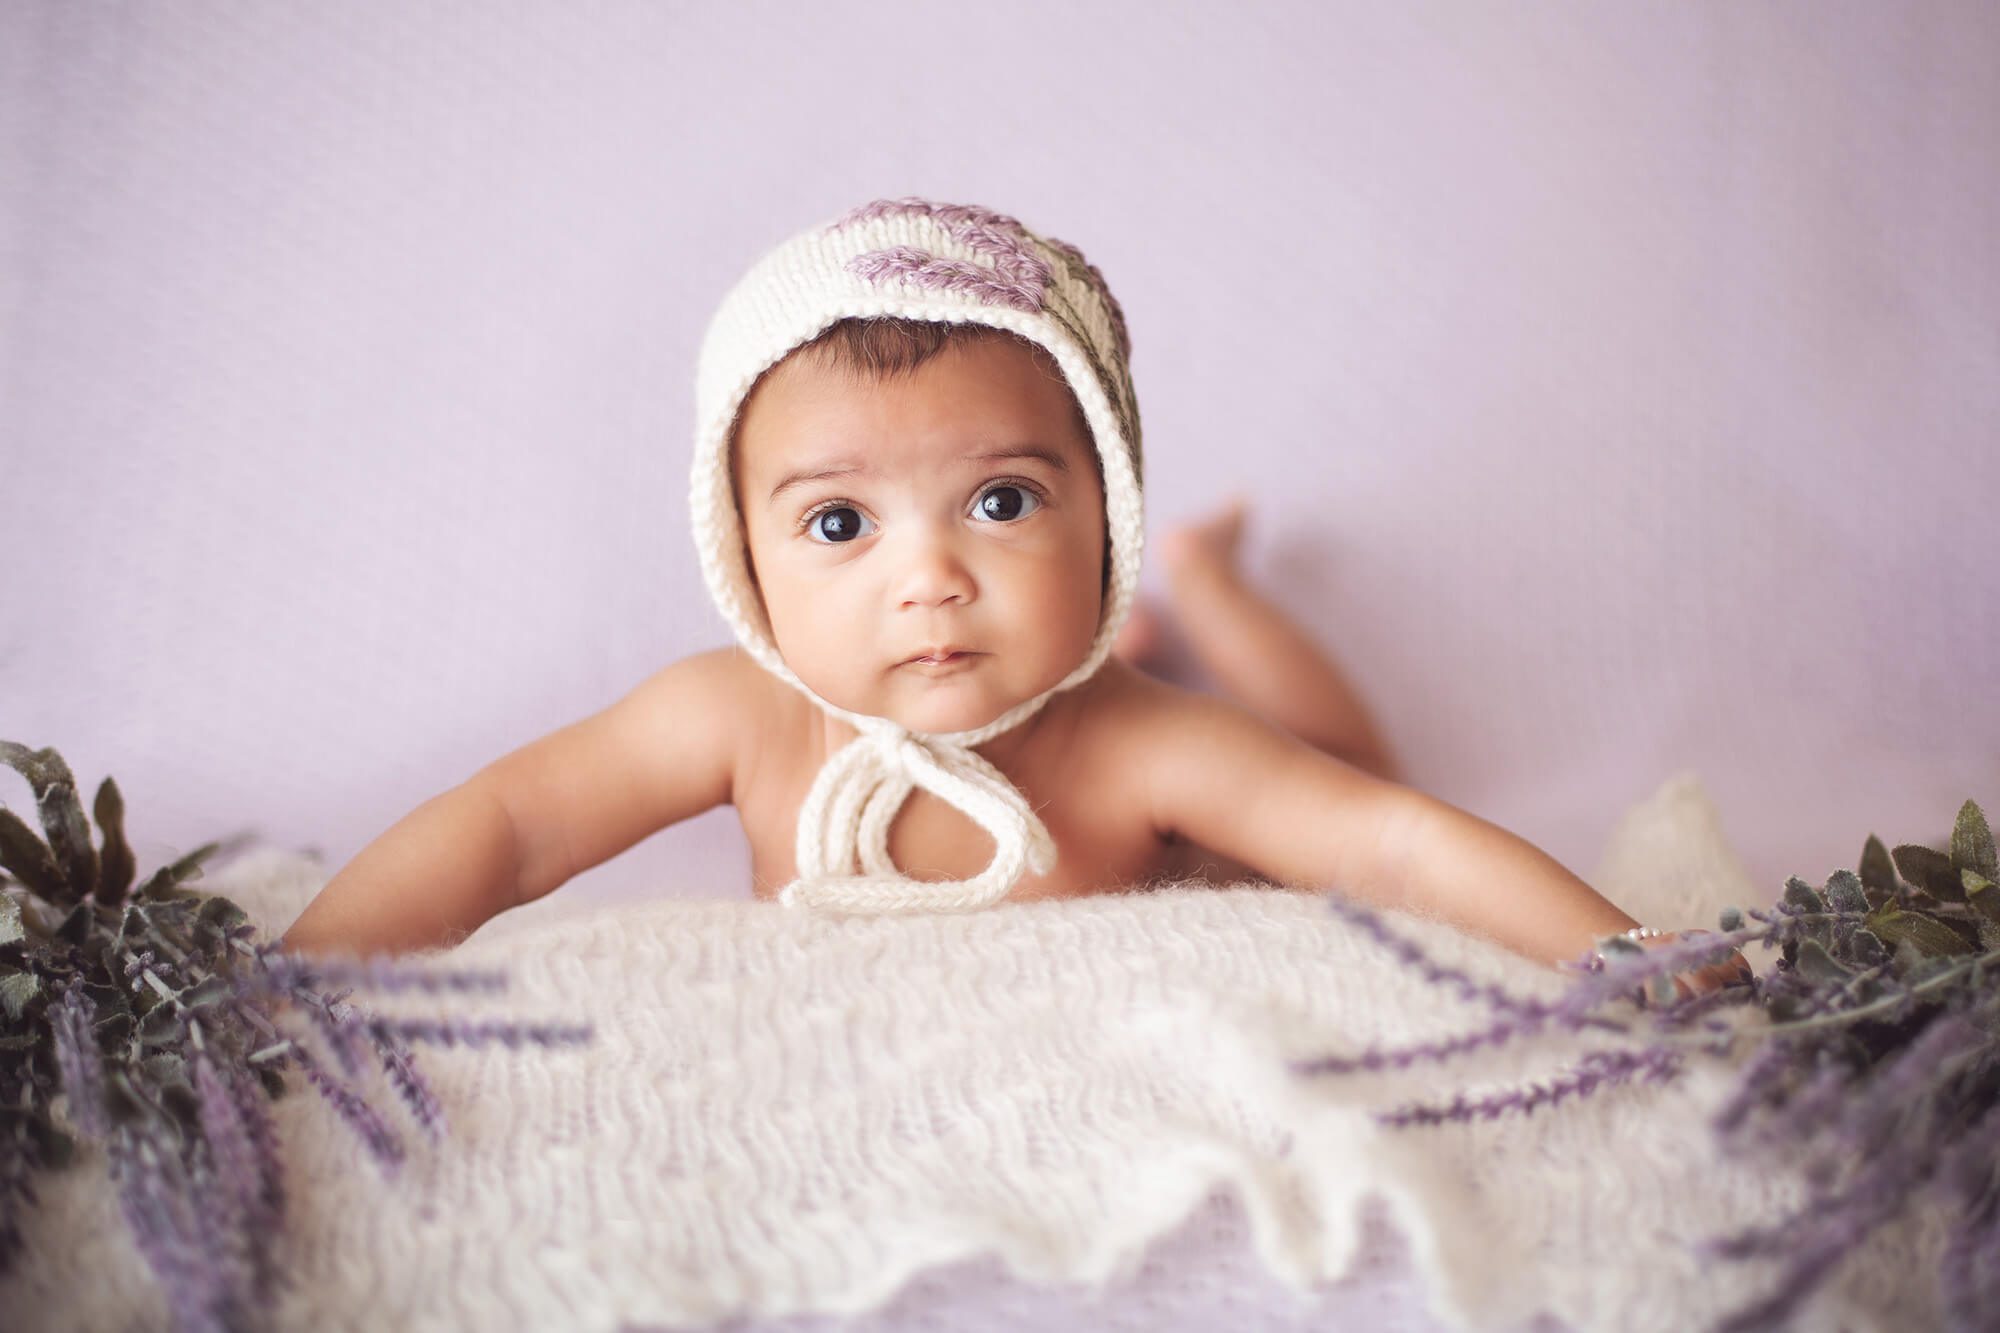 Baby Evelyn during her 3-month milestone session surrounded by lavender